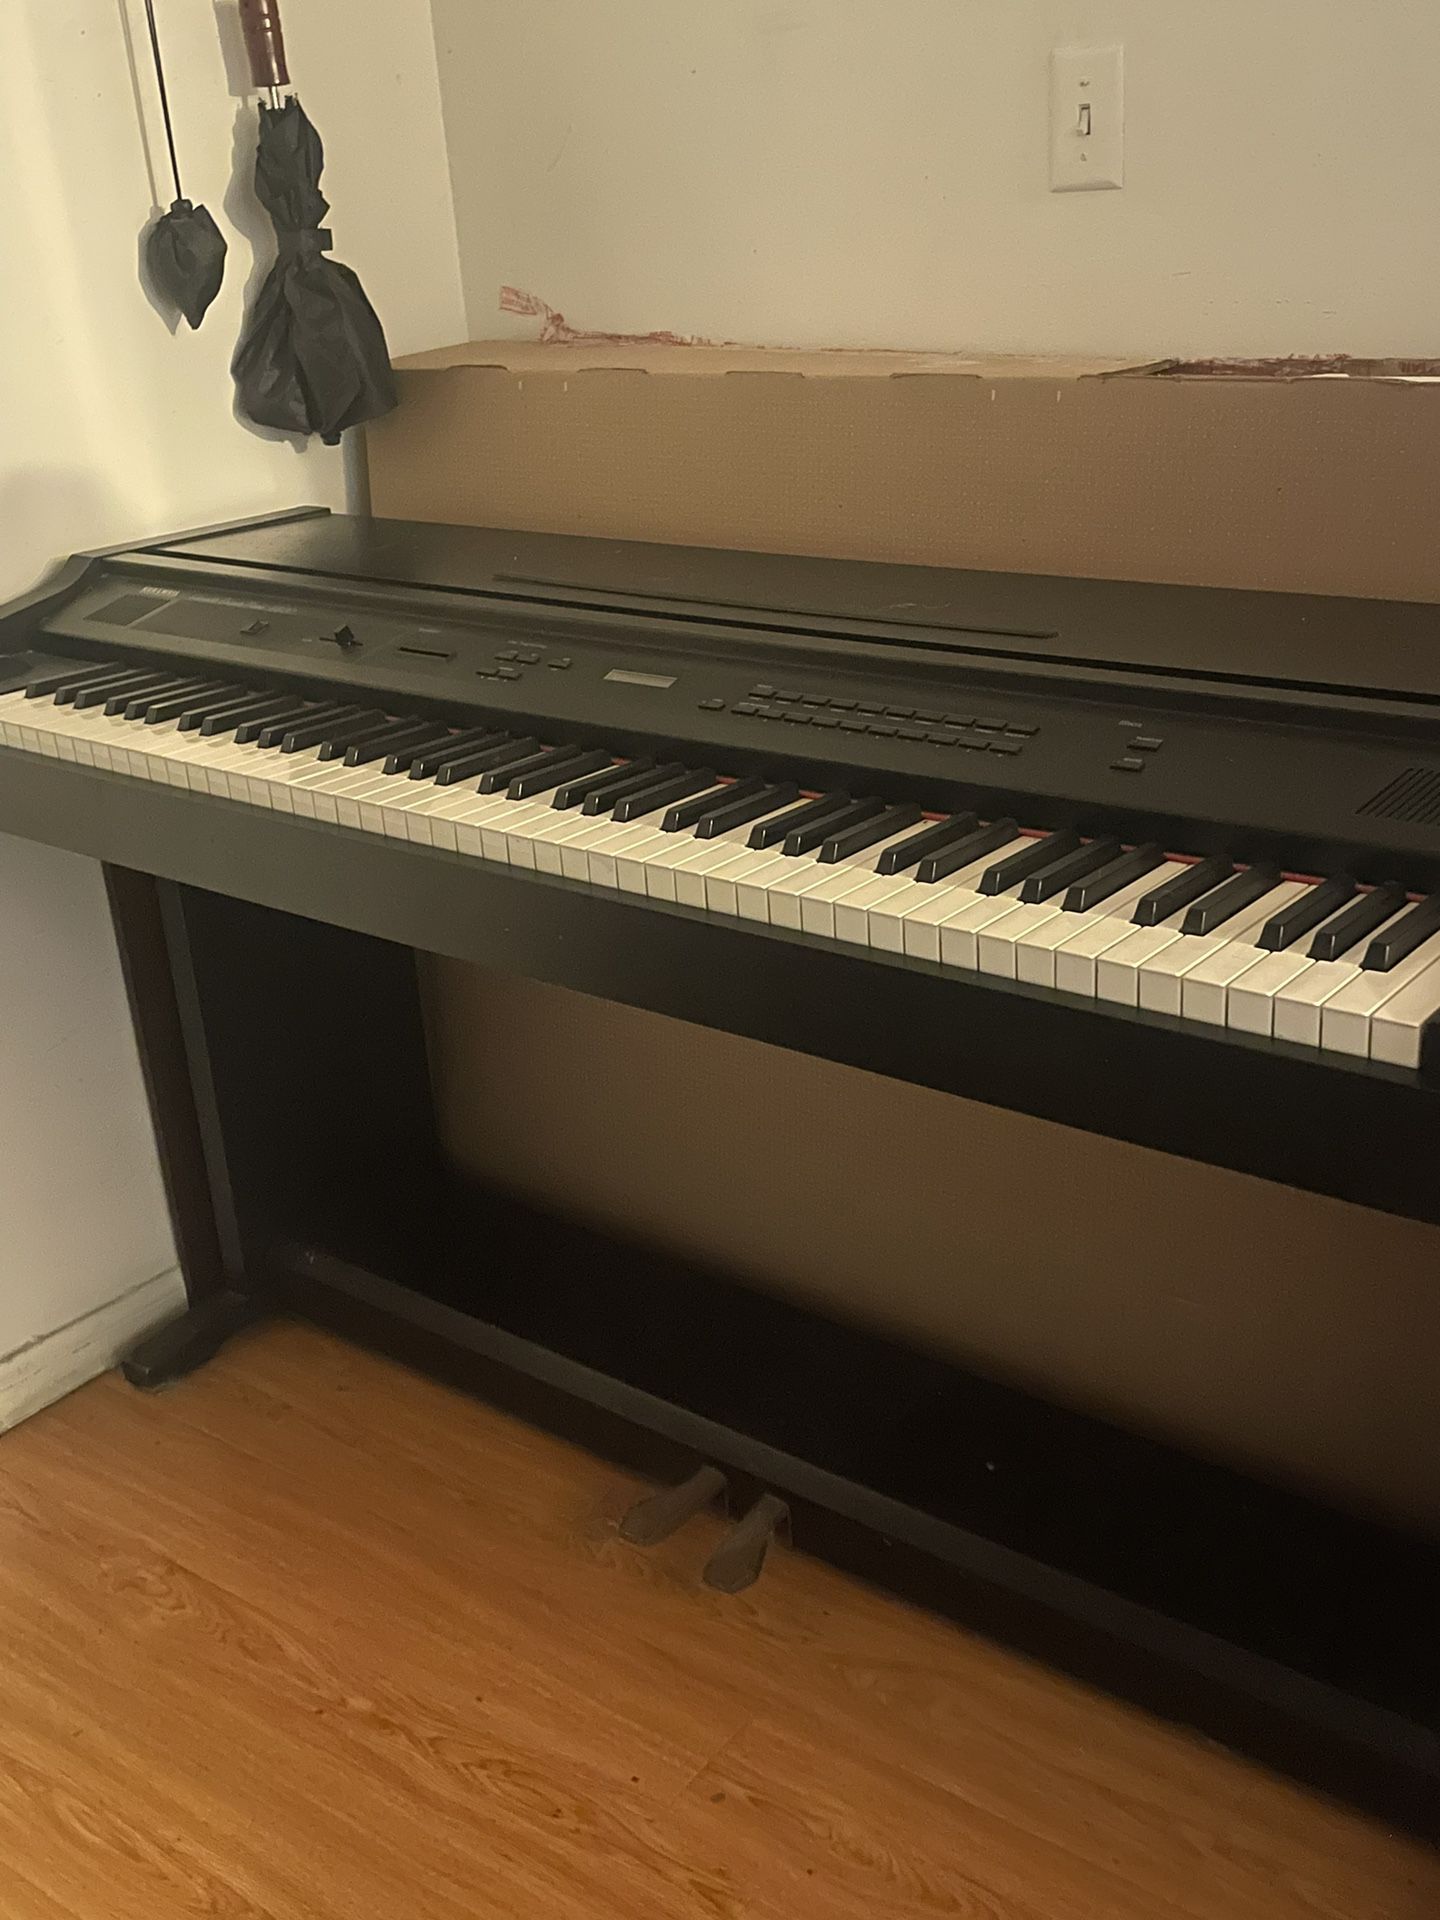  Free Kurzwell Eg20 Electric Piano Pick Up No Delivery.  It Works Pick It Up 